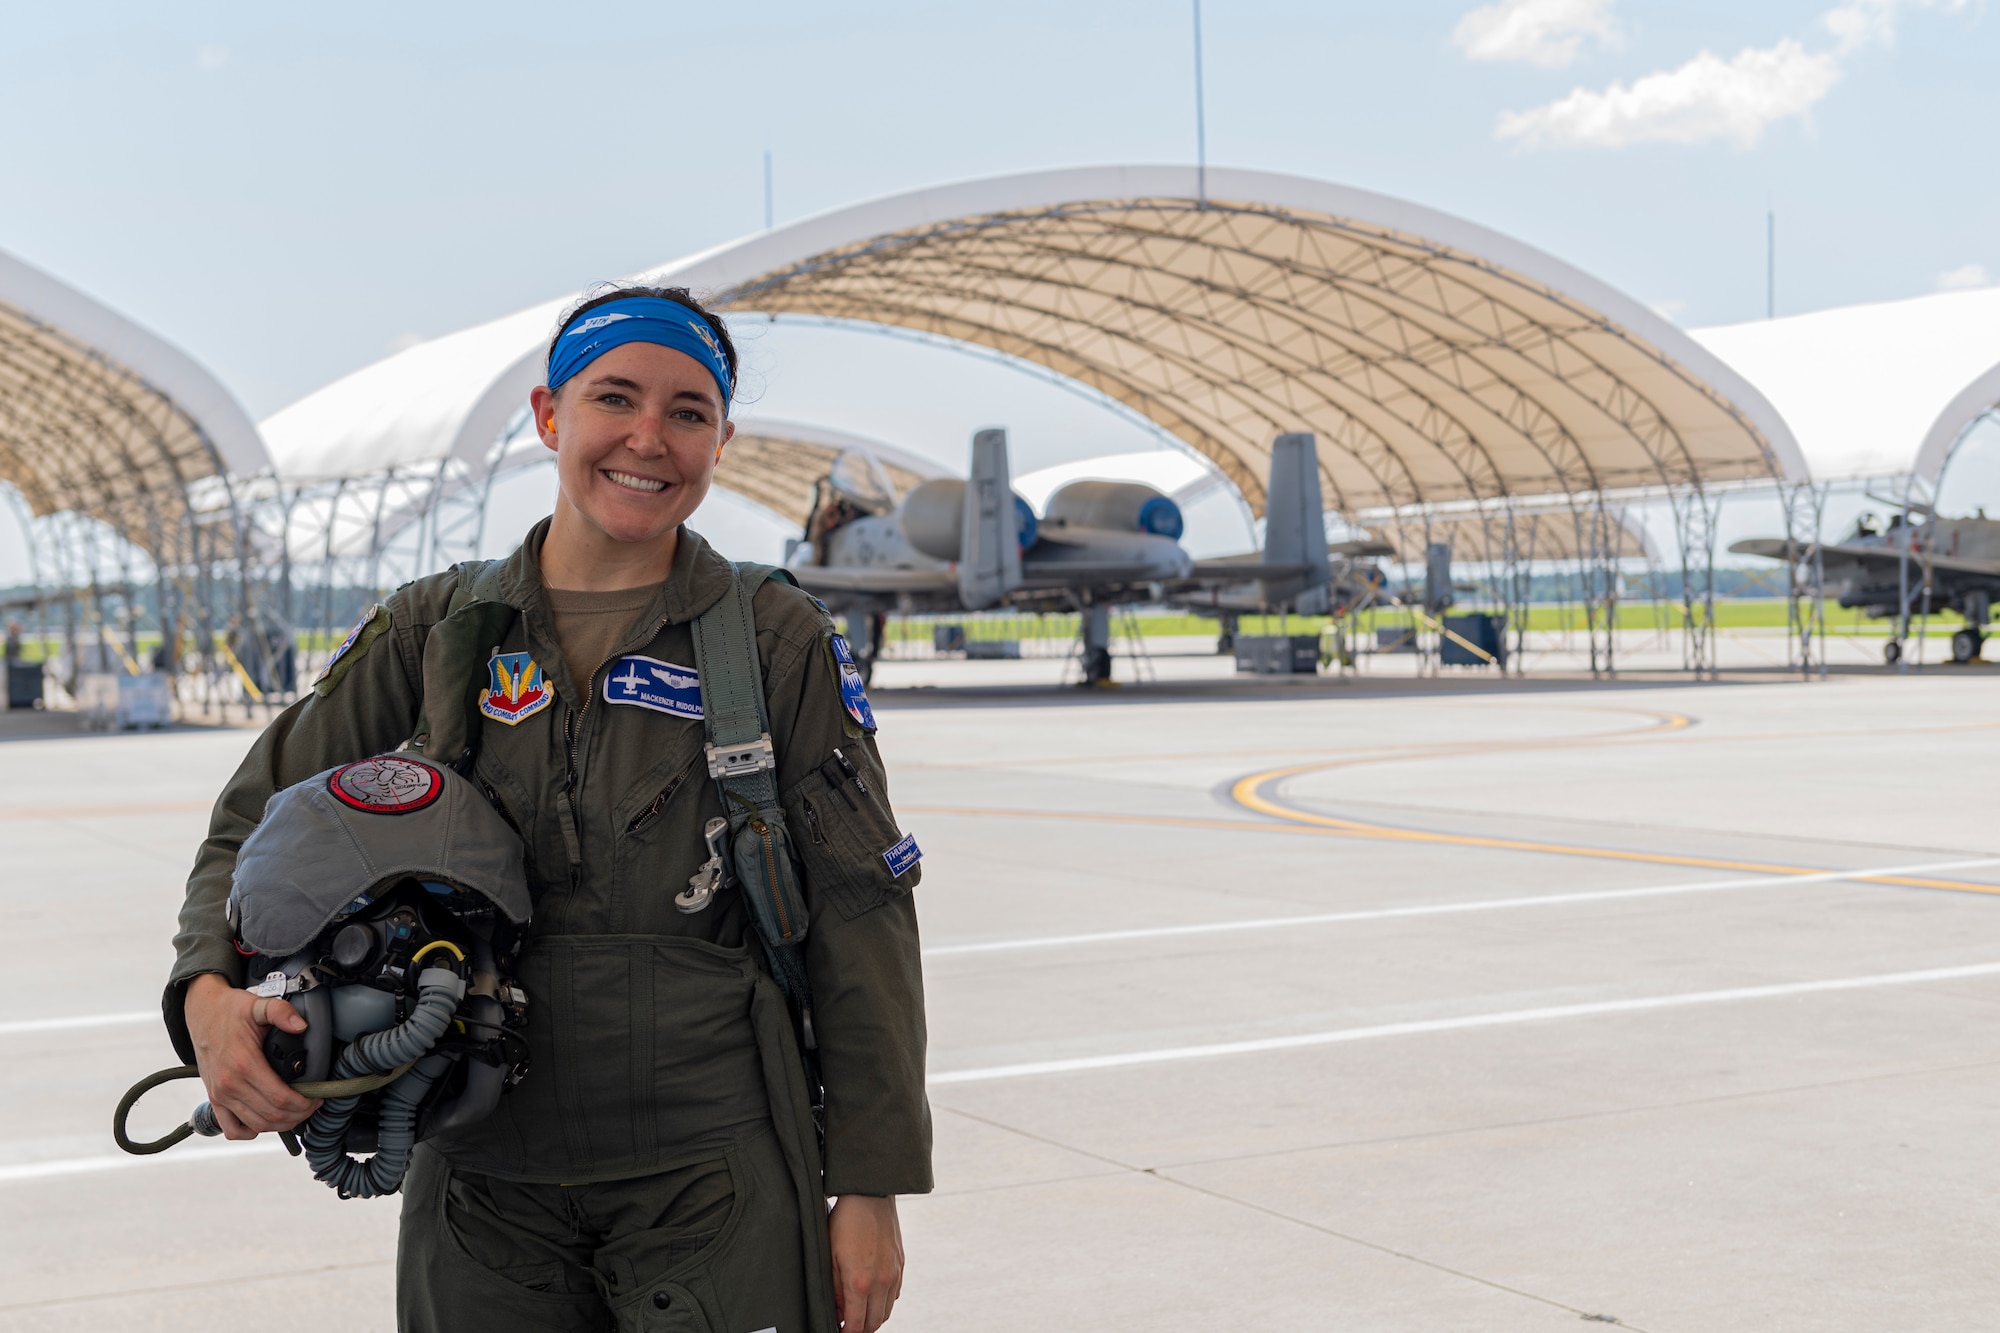 U.S. Air Force 1st Lt. Mackenzie Rudolph, 74th Fighter Squadron A-10 Thunderbolt II pilot, poses with her helmet after a flight at Moody Air Force Base, Georgia, June 2, 2022. During air-to-air combat or while maneuvering the aircraft, the constant weight of an approximate 10-pound helmet and the added G force can potentially cause neck and spinal strain. (U.S. Air Force photo by Senior Airman Jasmine Barnes)